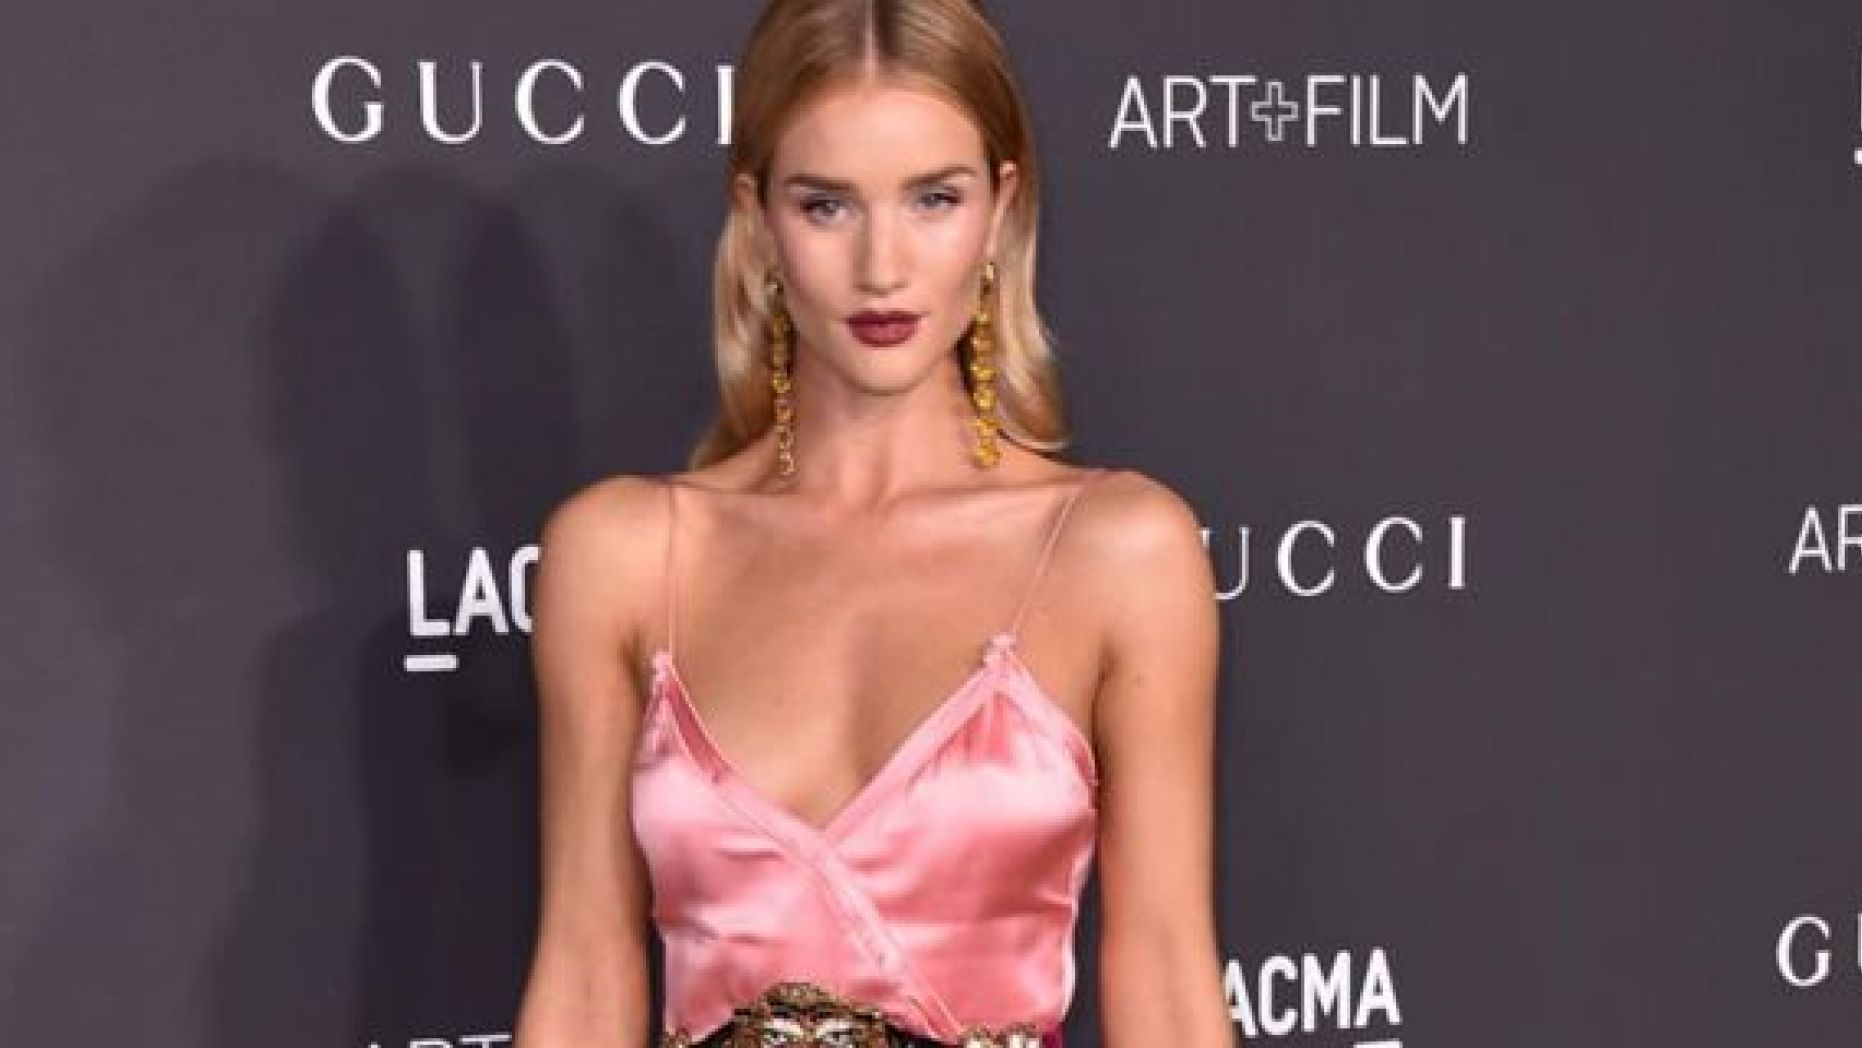 Rosie Huntington-Whiteley shares why she decided to leave Victoria's Secret and why she launched her own brand.